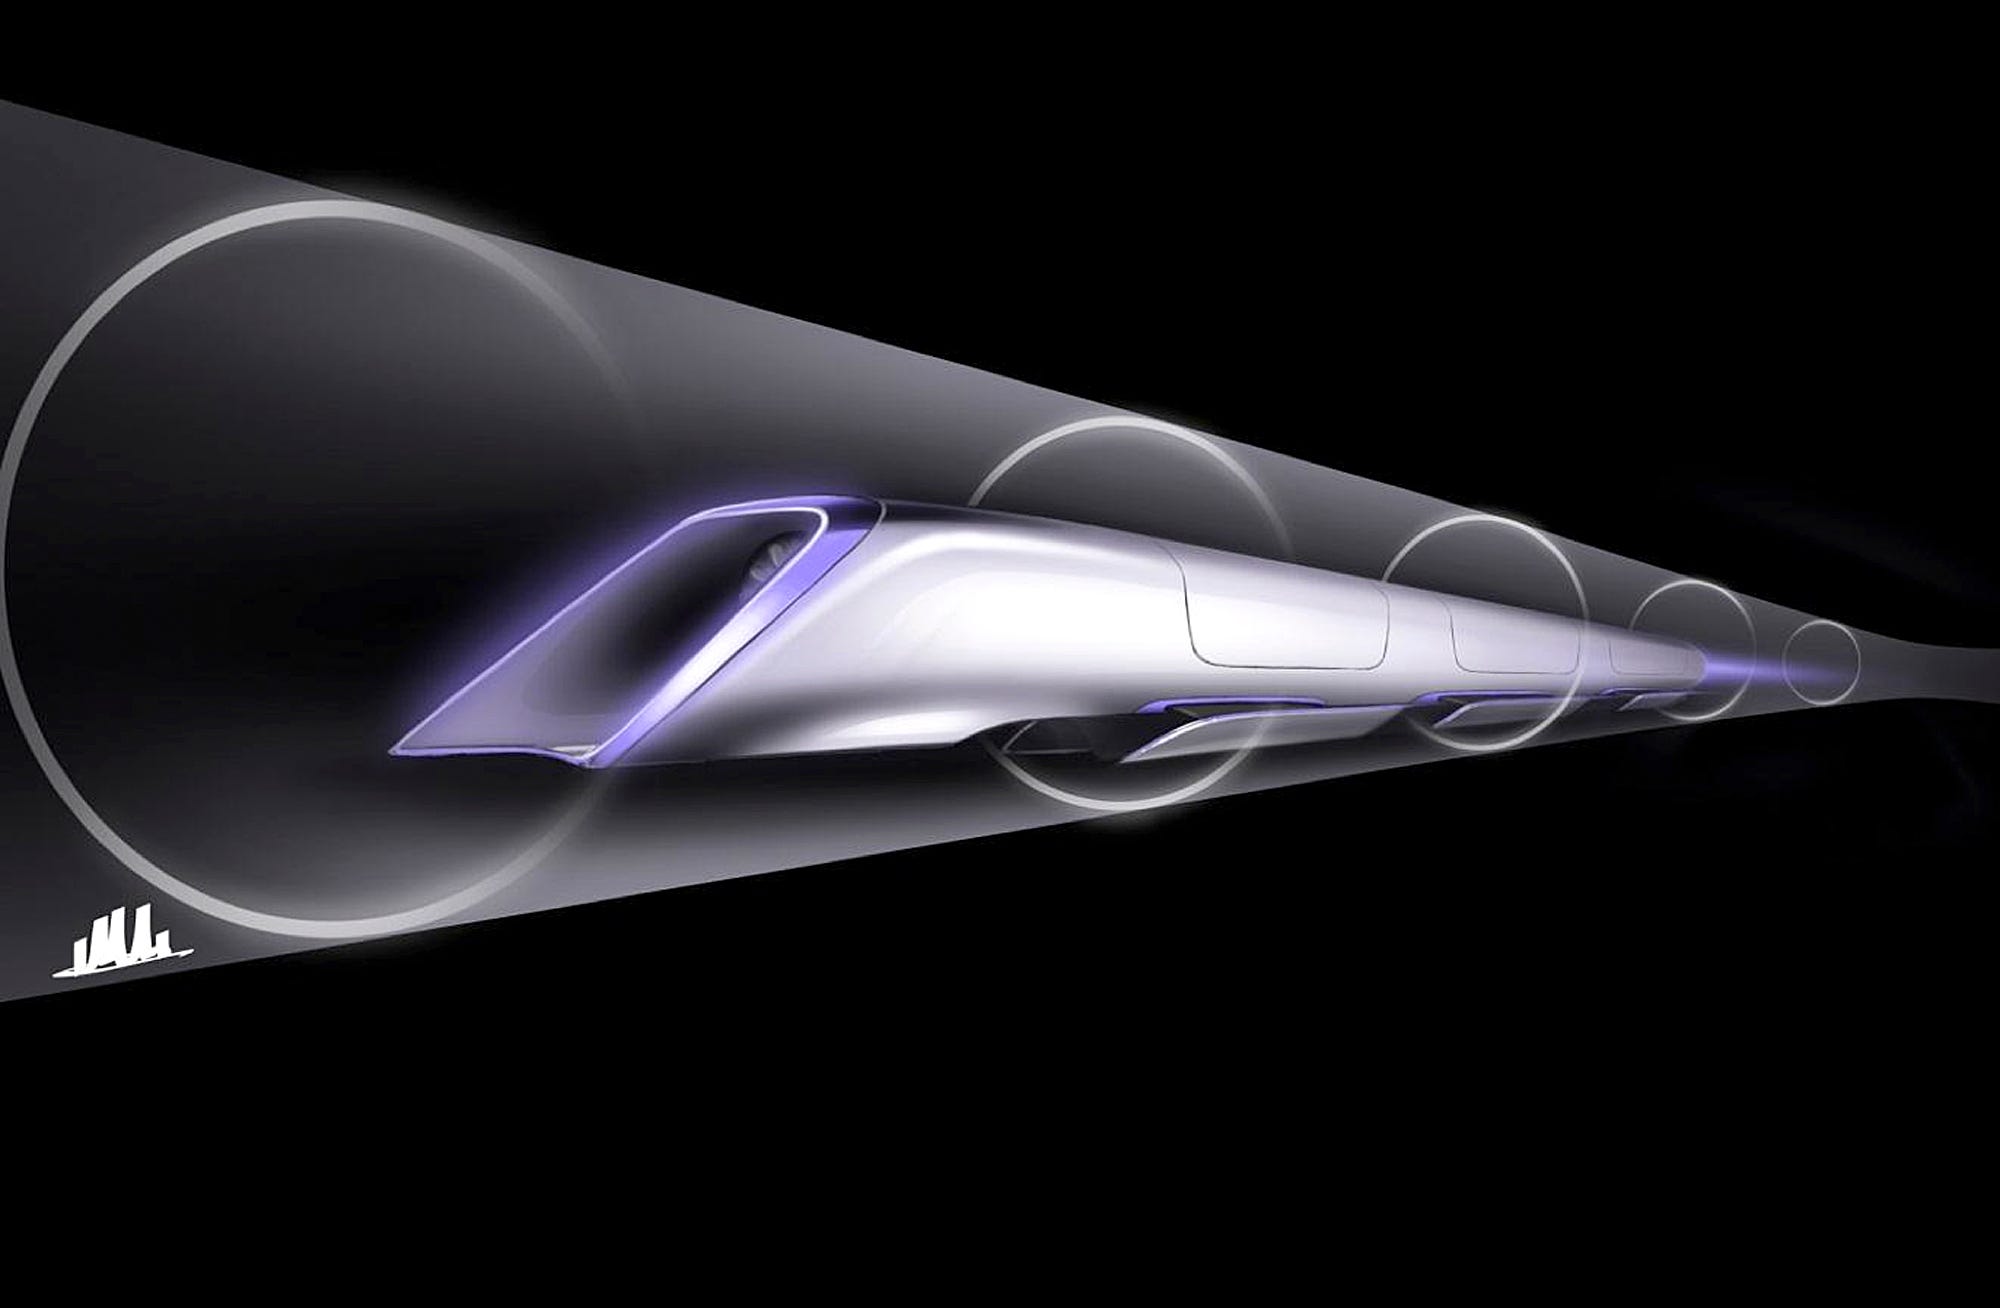 Elon Musk: I got 'verbal' approval for 29-minute NYC-to-DC hyperloop